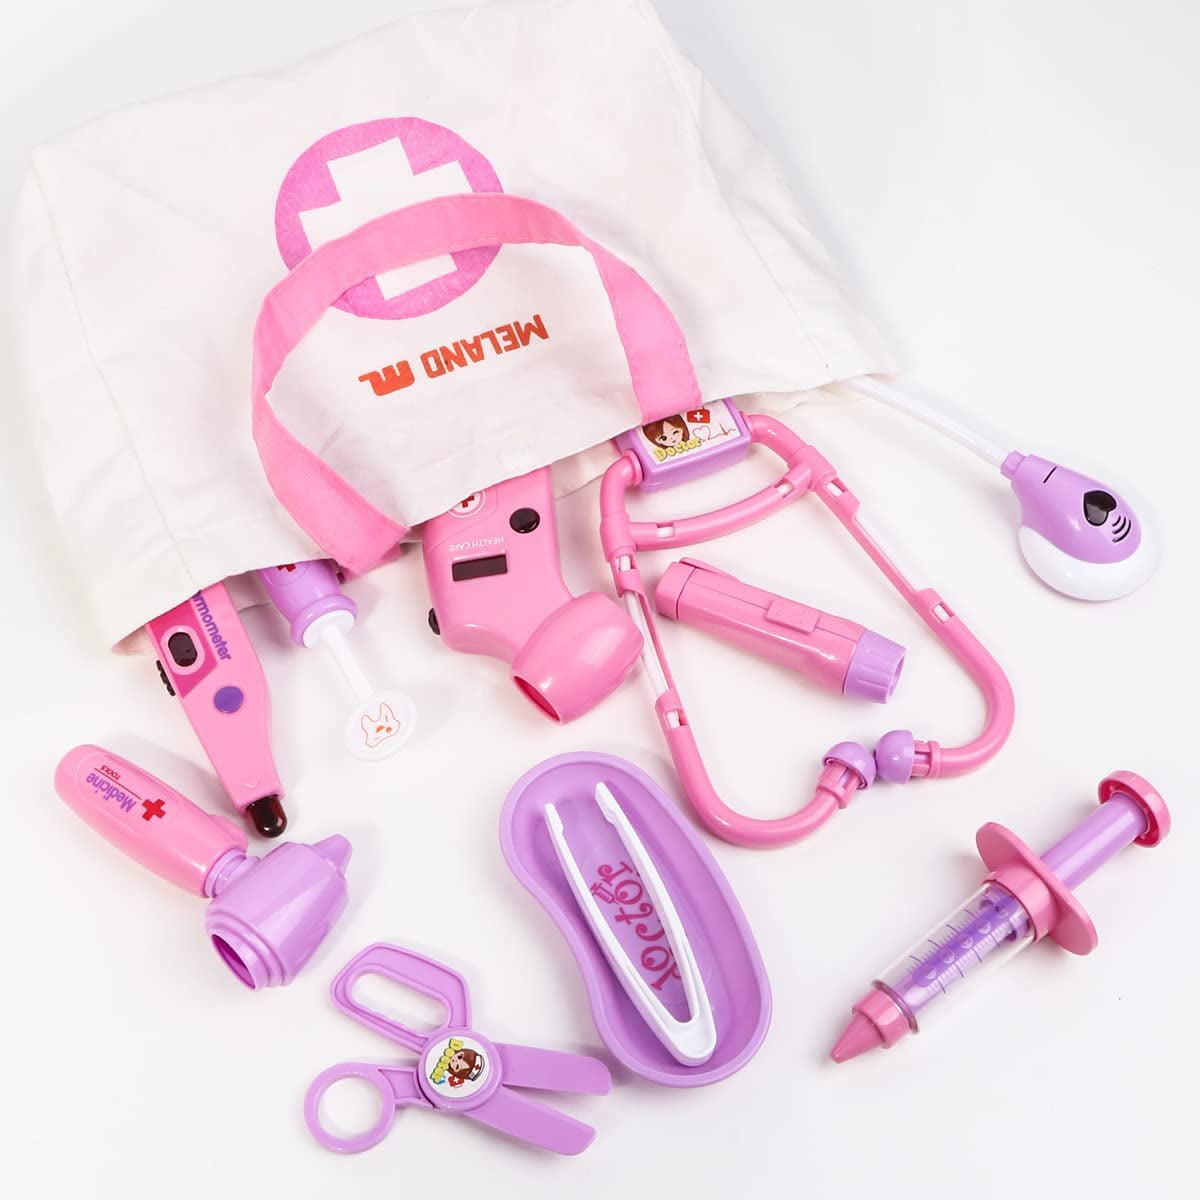 Pretend Play Doctor Set for Girls - Comprehensive Toy Doctor Kit with Dog Toy, Portable Bag, Electronic Stethoscope & Dress up Costume